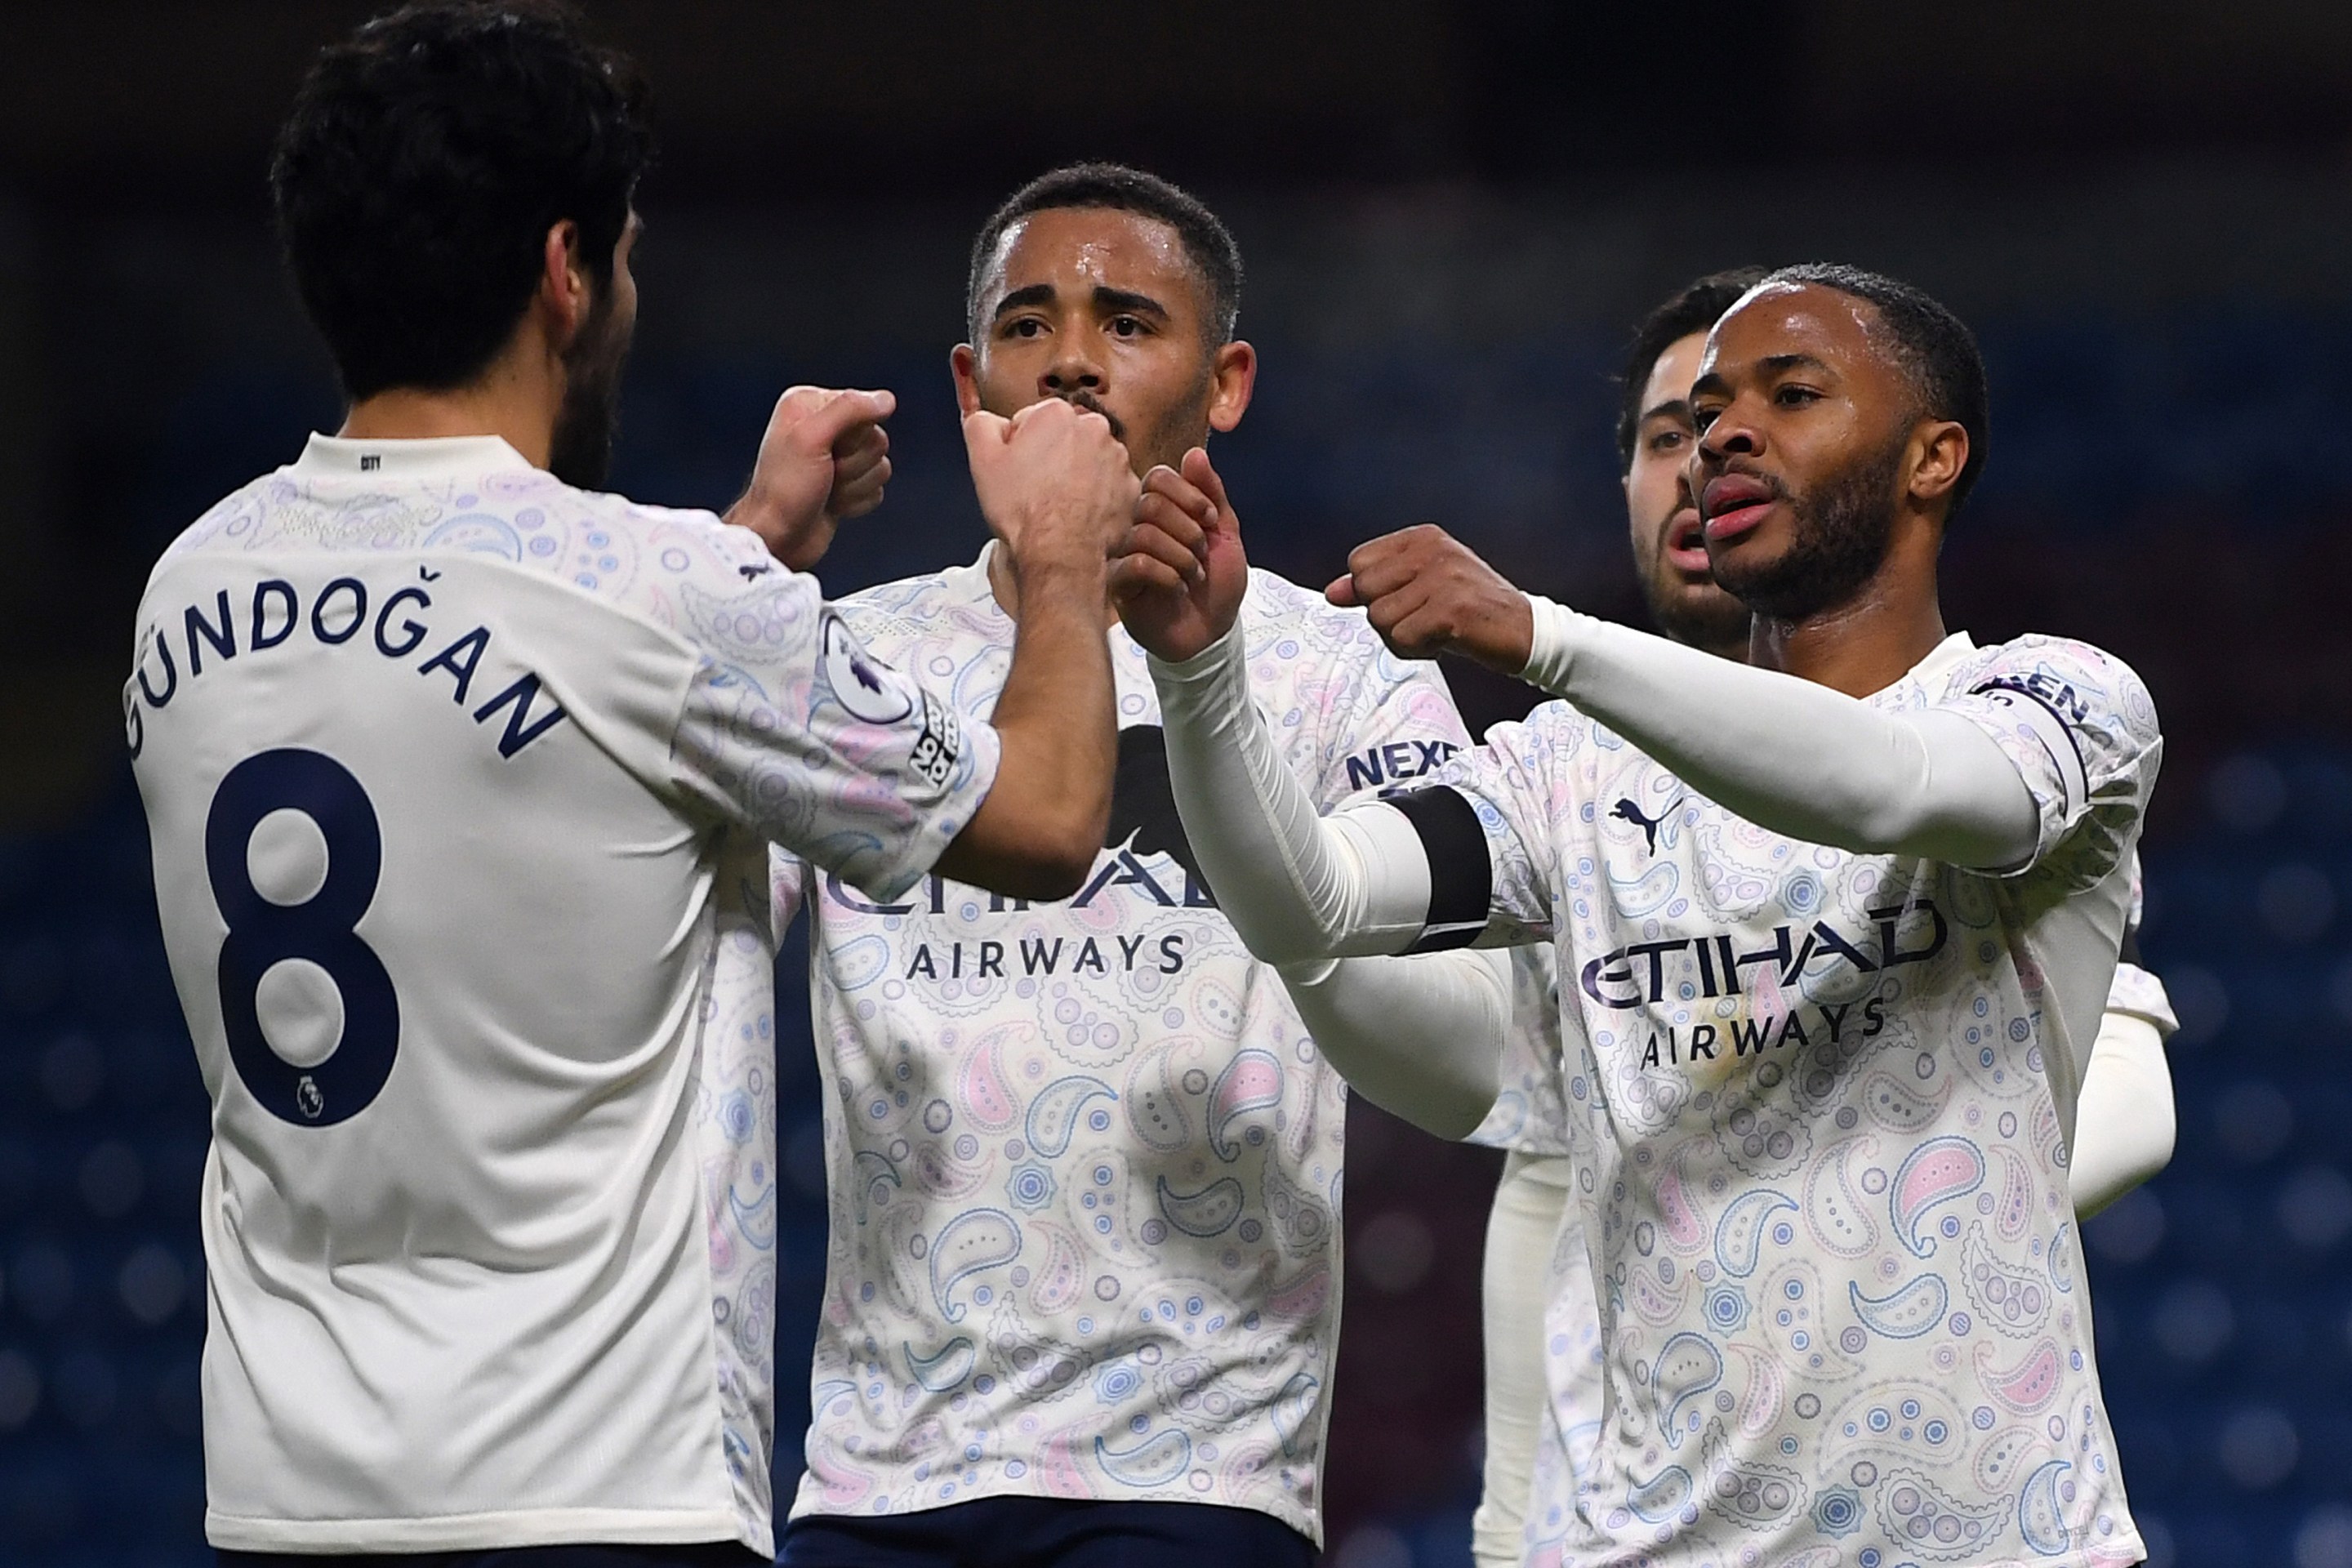 Manchester City's English midfielder Raheem Sterling (R) celebrates scoring his team's second goal with Manchester City's Brazilian striker Gabriel Jesus (C) during the English Premier League football match between Burnley and Manchester City at Turf Moor in Burnley, north west England on February 3, 2021.